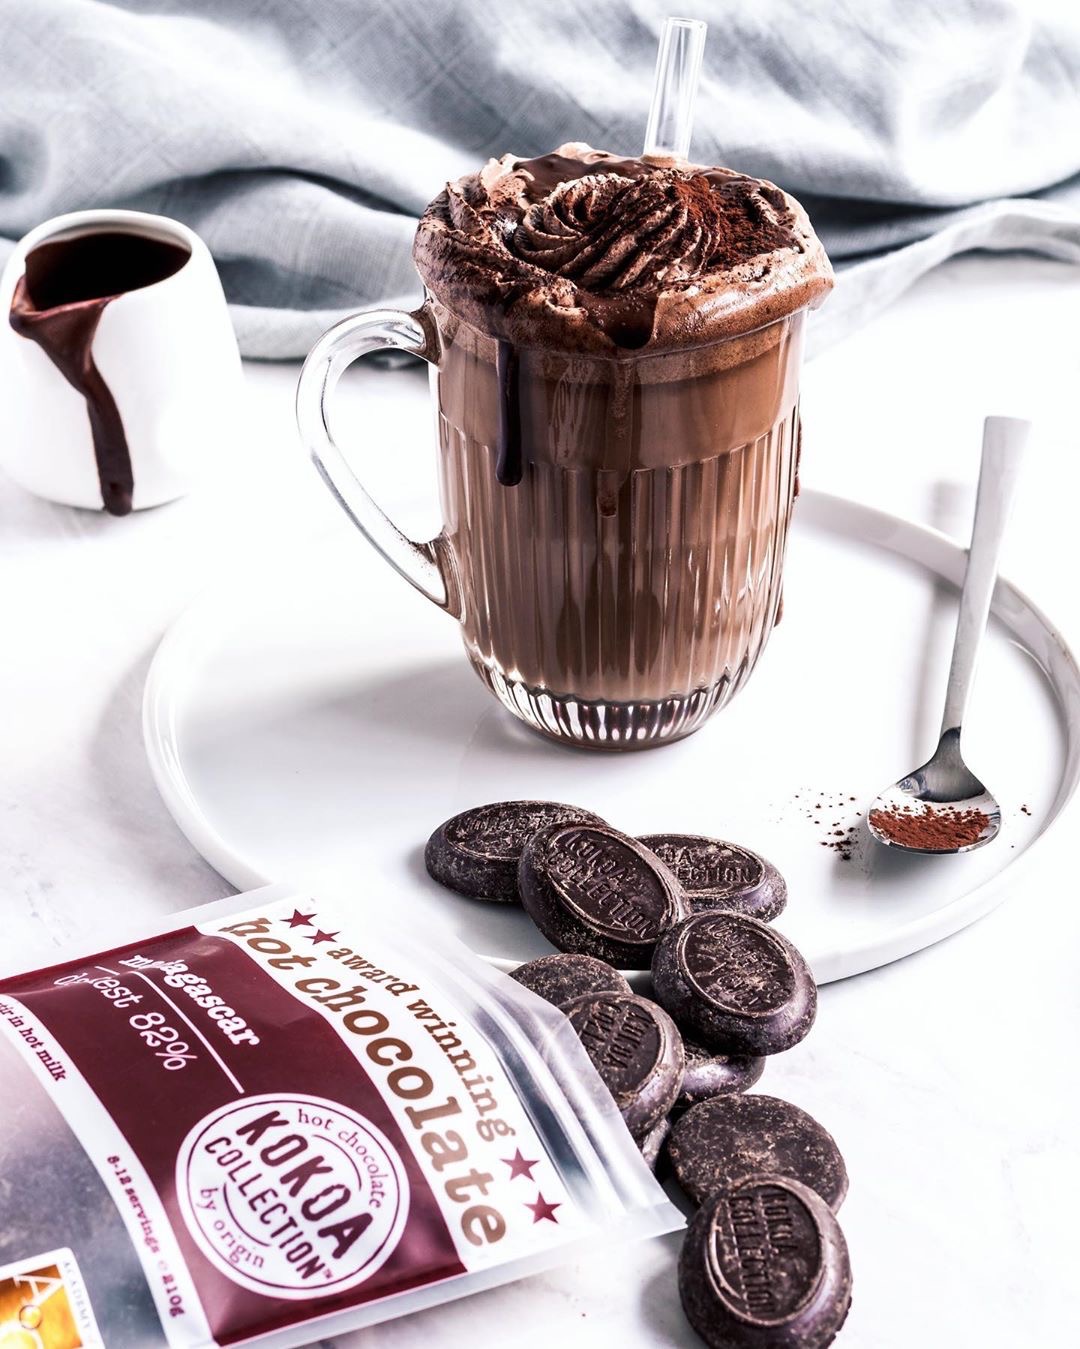 For serious hot chocolate lovers